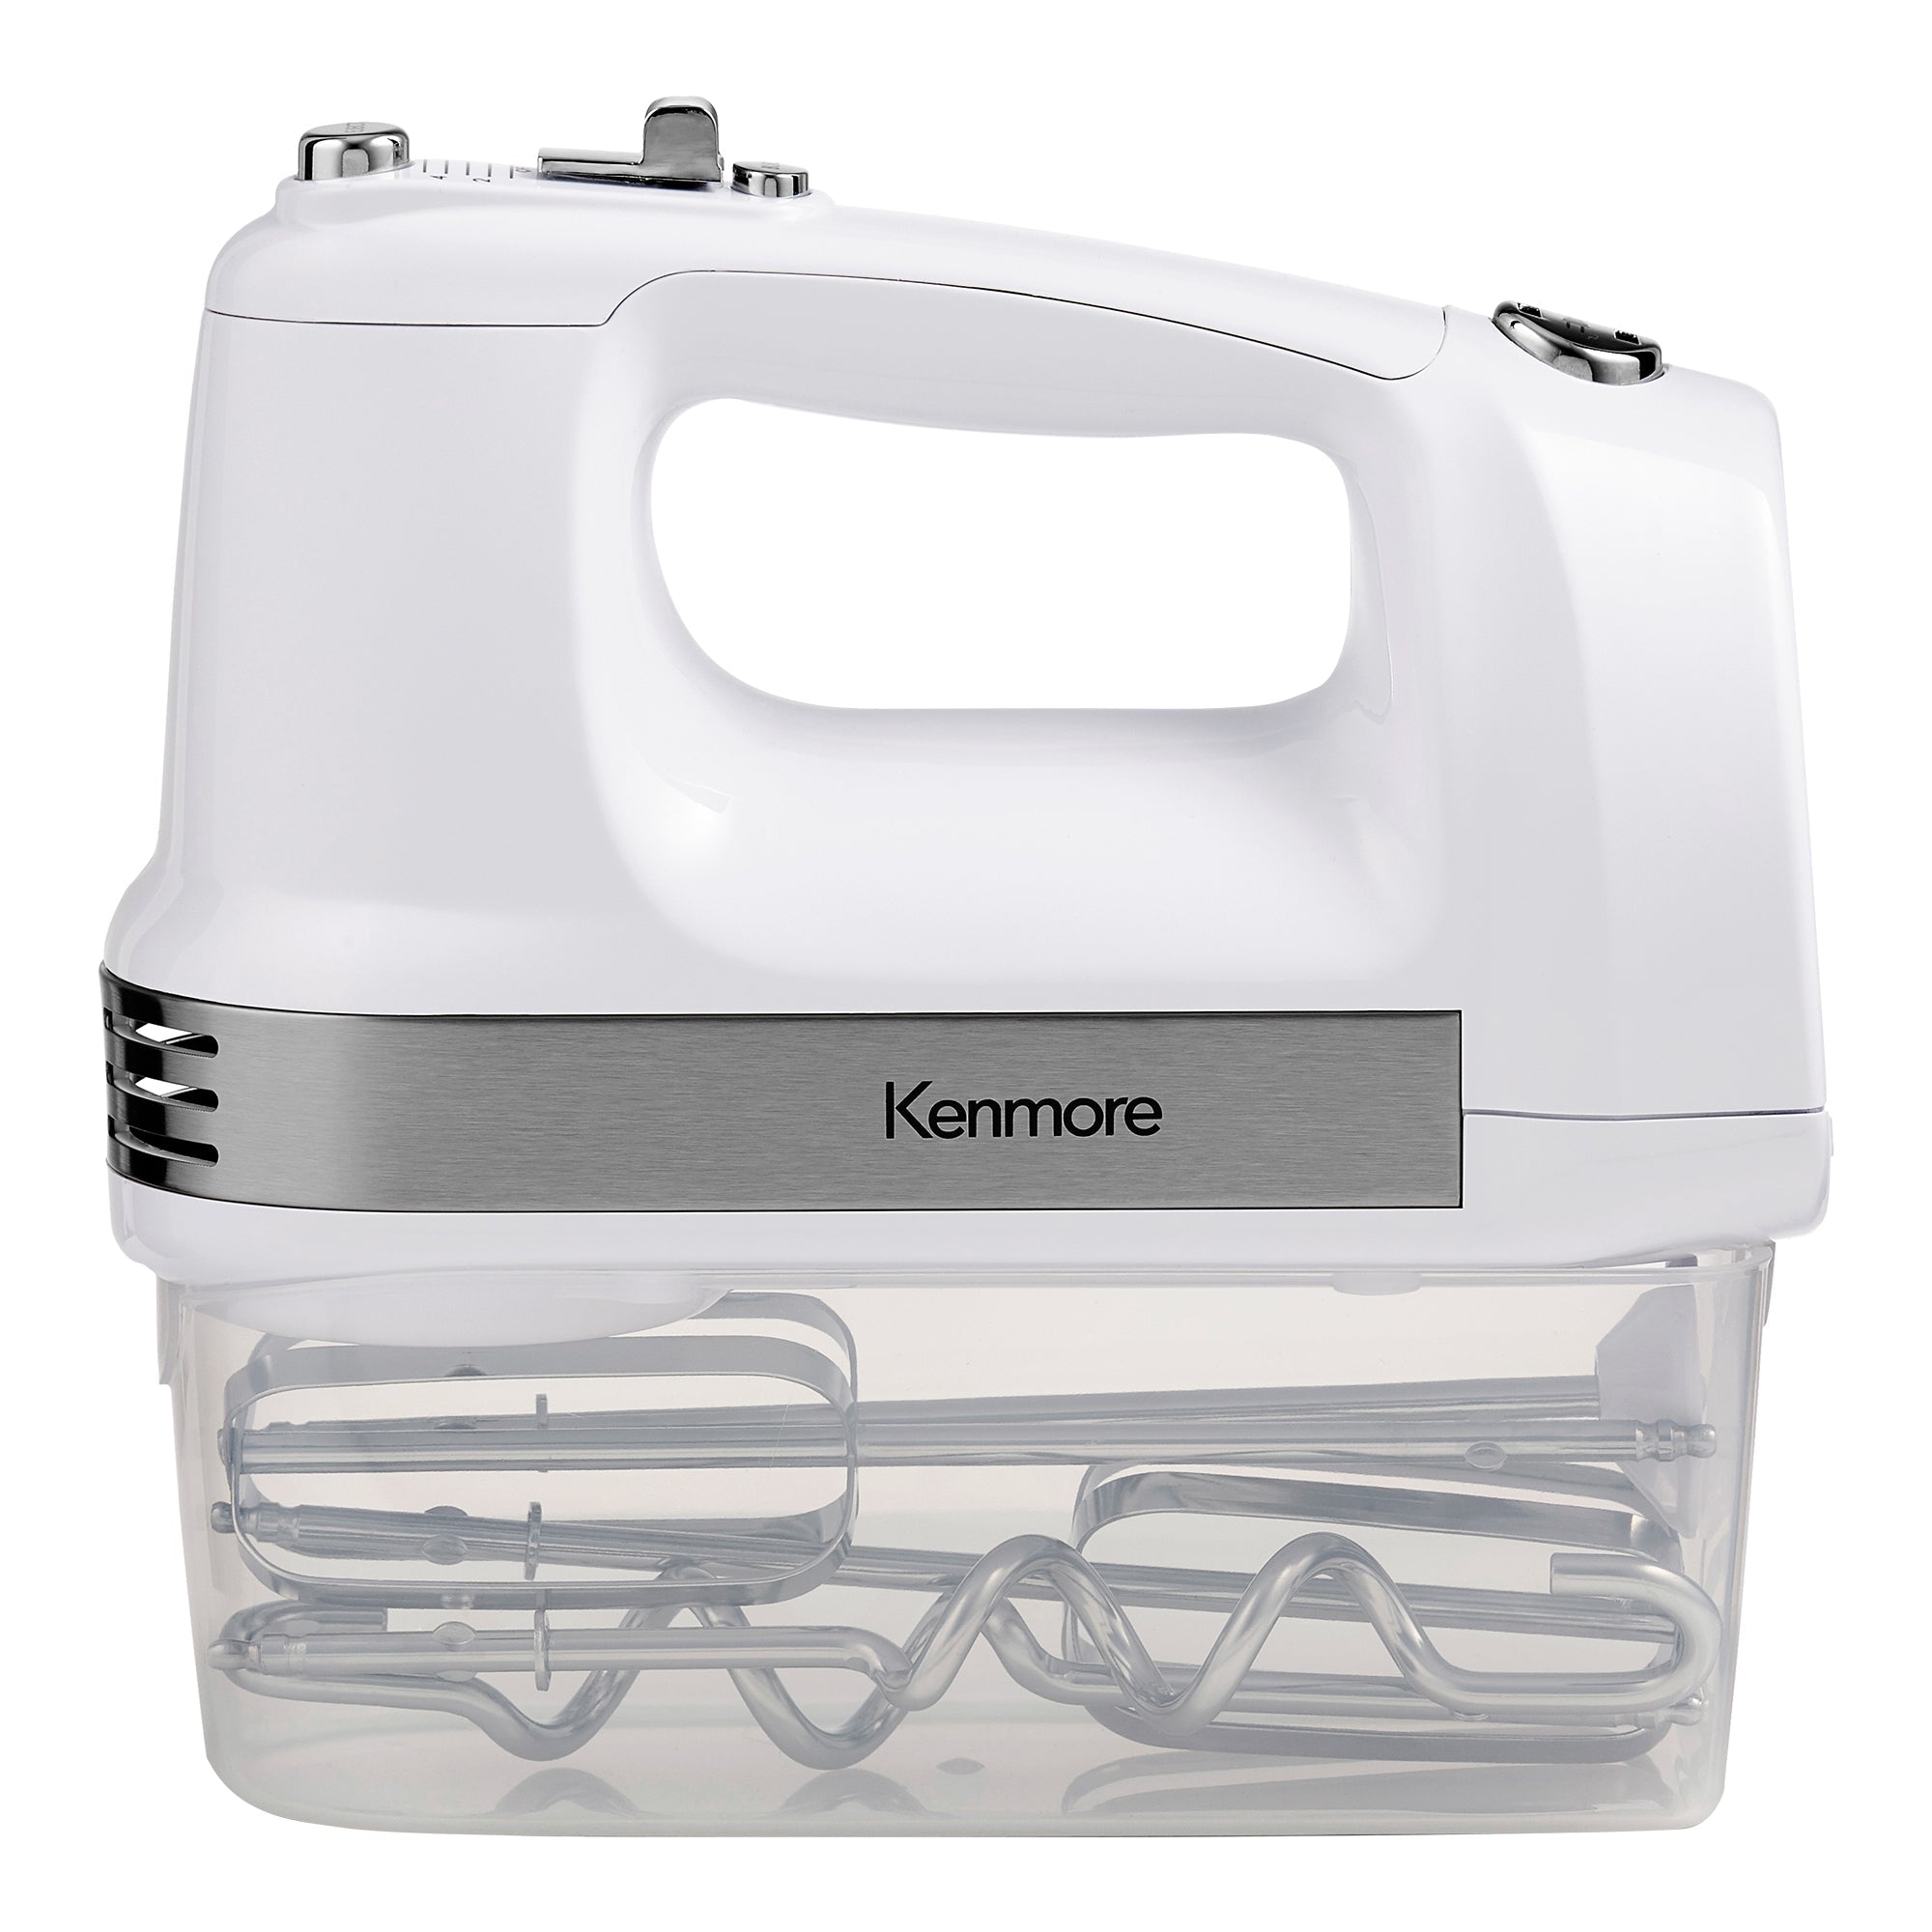 Kenmore white 5-speed hand mixer with storage base attached and accessories inside